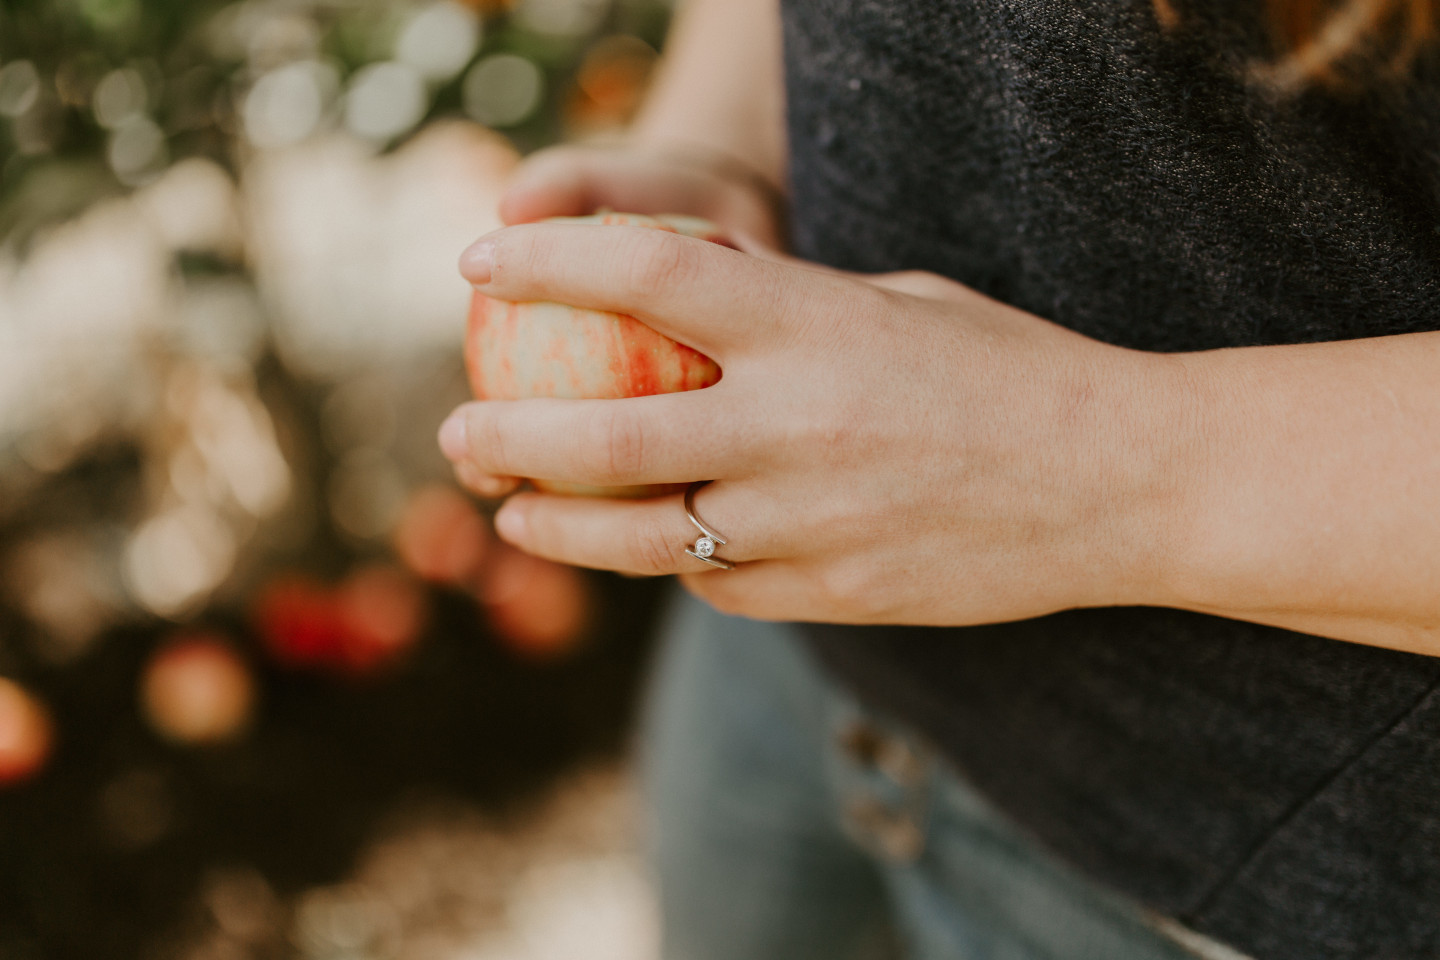 Hannah holds an apple in Corvallis, Oregon. Intimate wedding photography in Corvallis Oregon by Sienna Plus Josh.